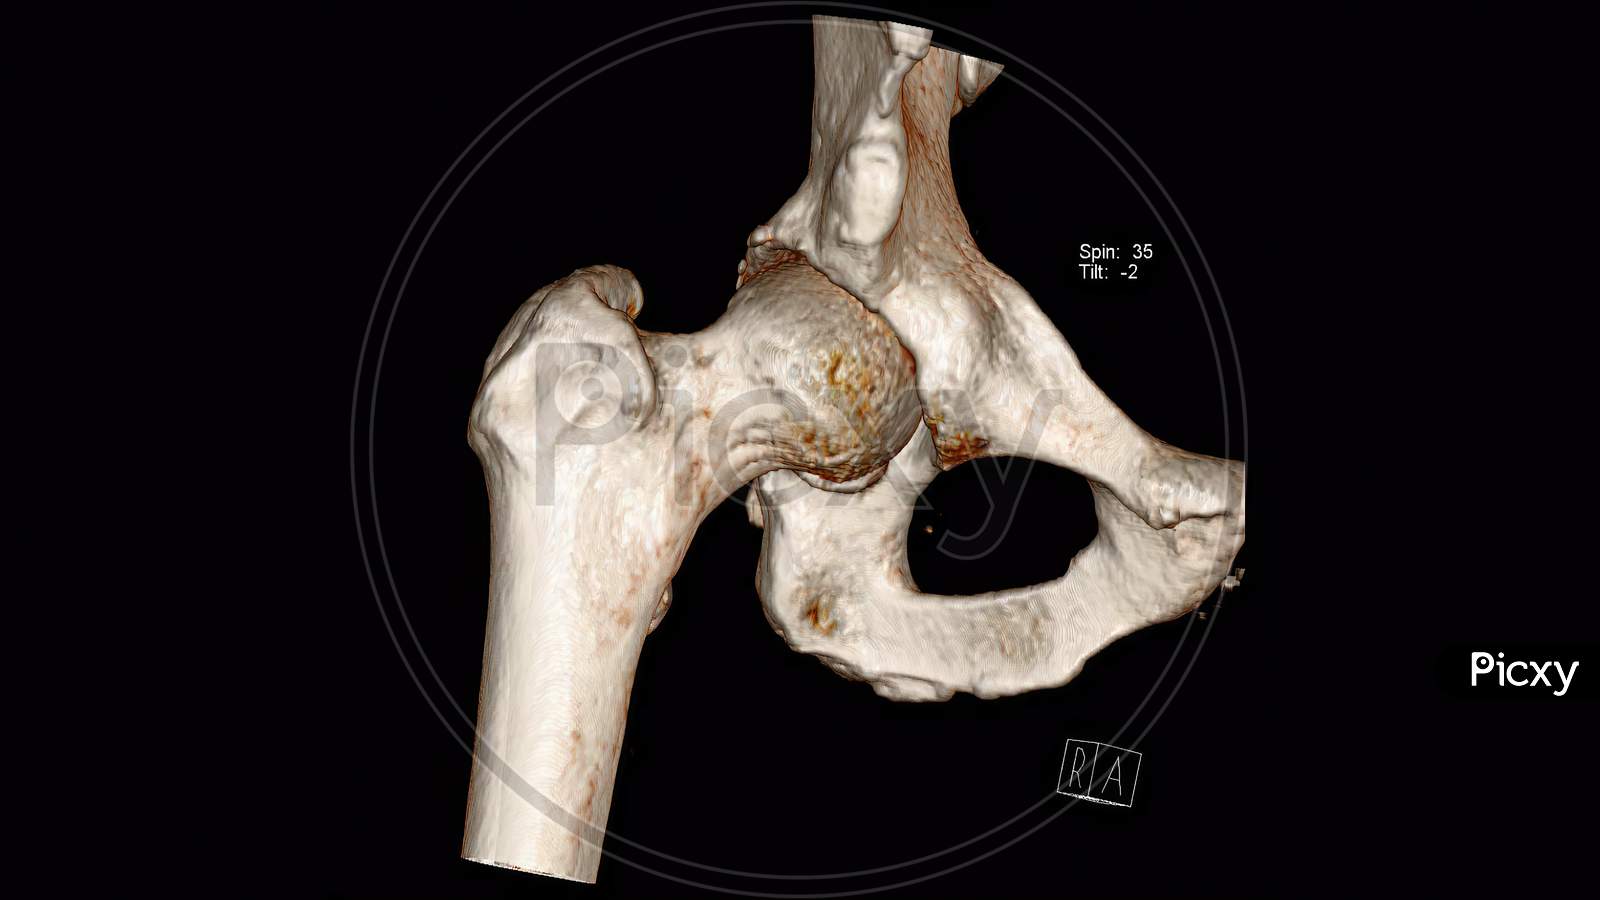 Radiology examination, Computed Tomography Volume Rendering examination of the  Hip joint ( CT VR Hip)